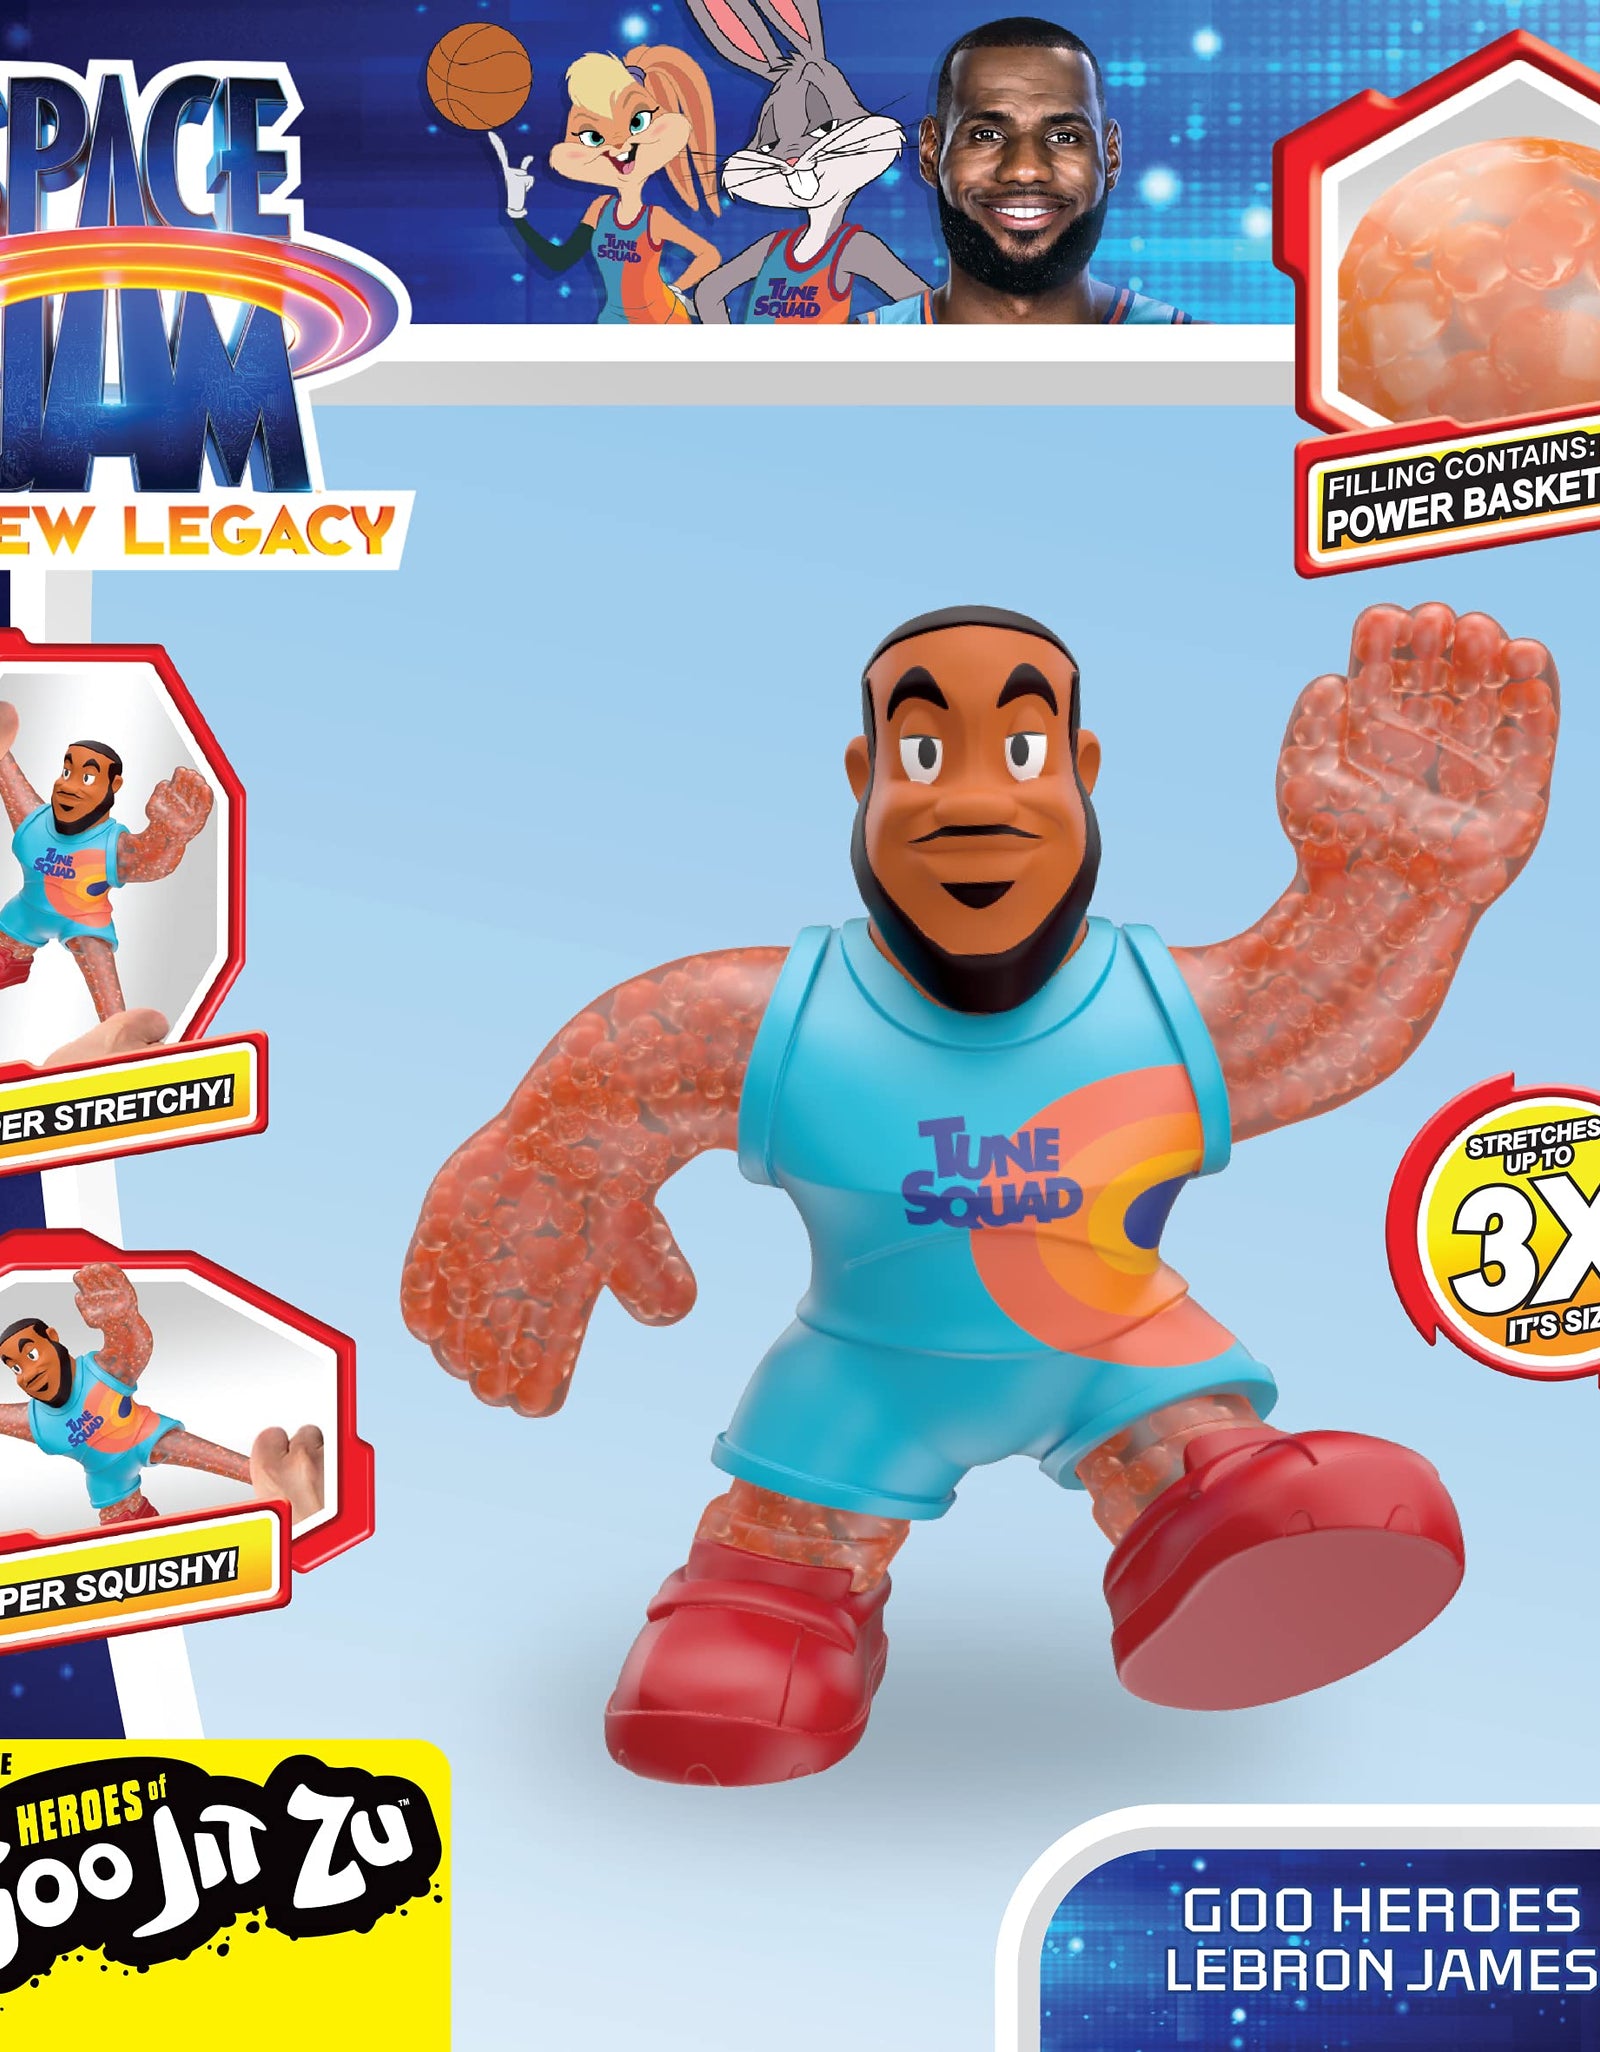 Moose Toys Heroes of Goo JIT Zu – Space Jam: A New Legacy - 5" Stretchy Goo Filled Action Figure - Lebron James